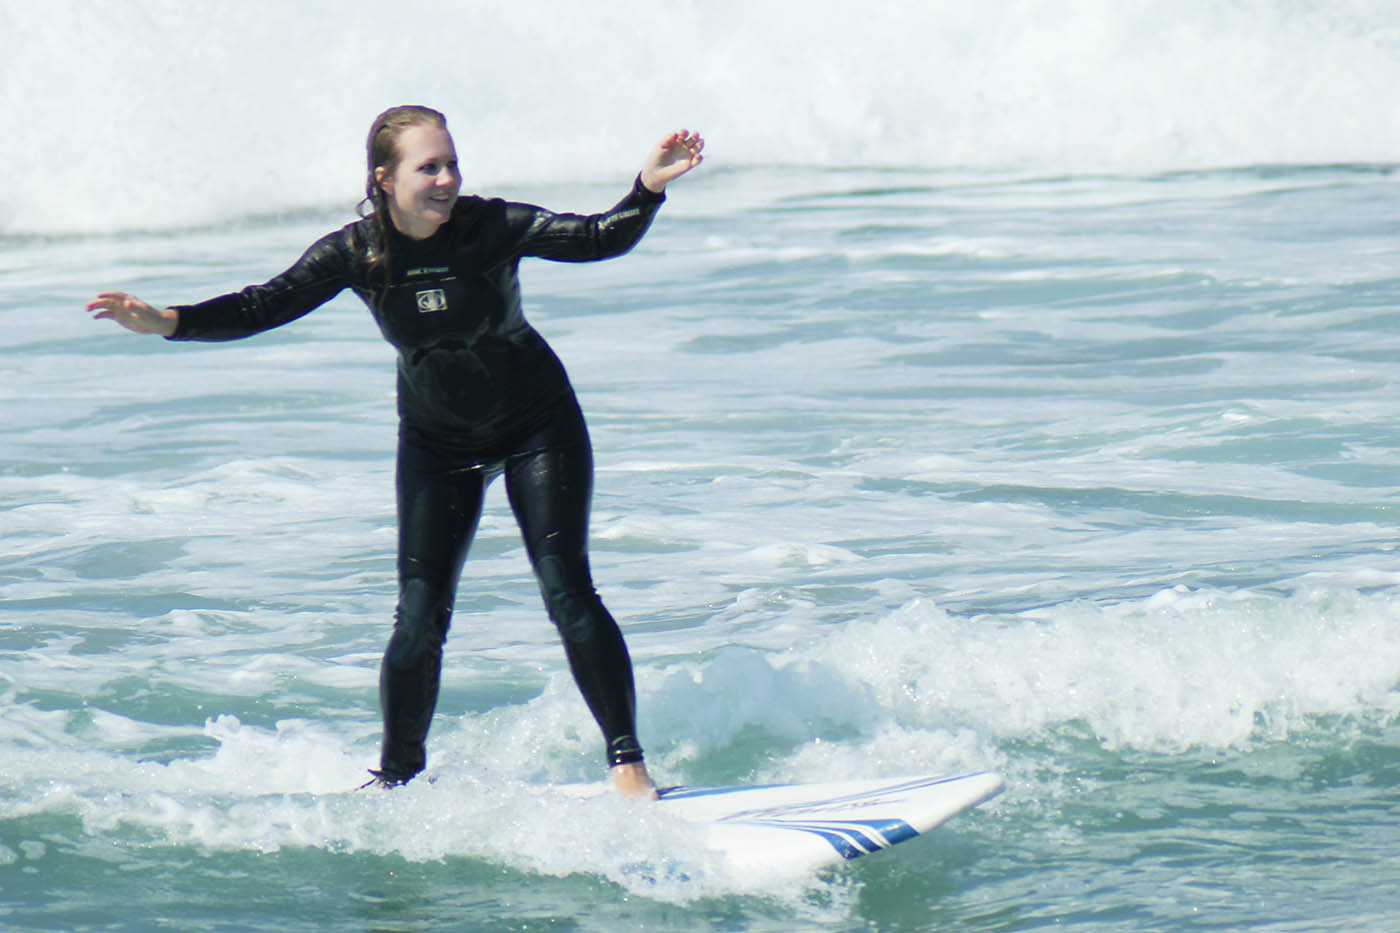 Surf lessons in San Clemente, CA